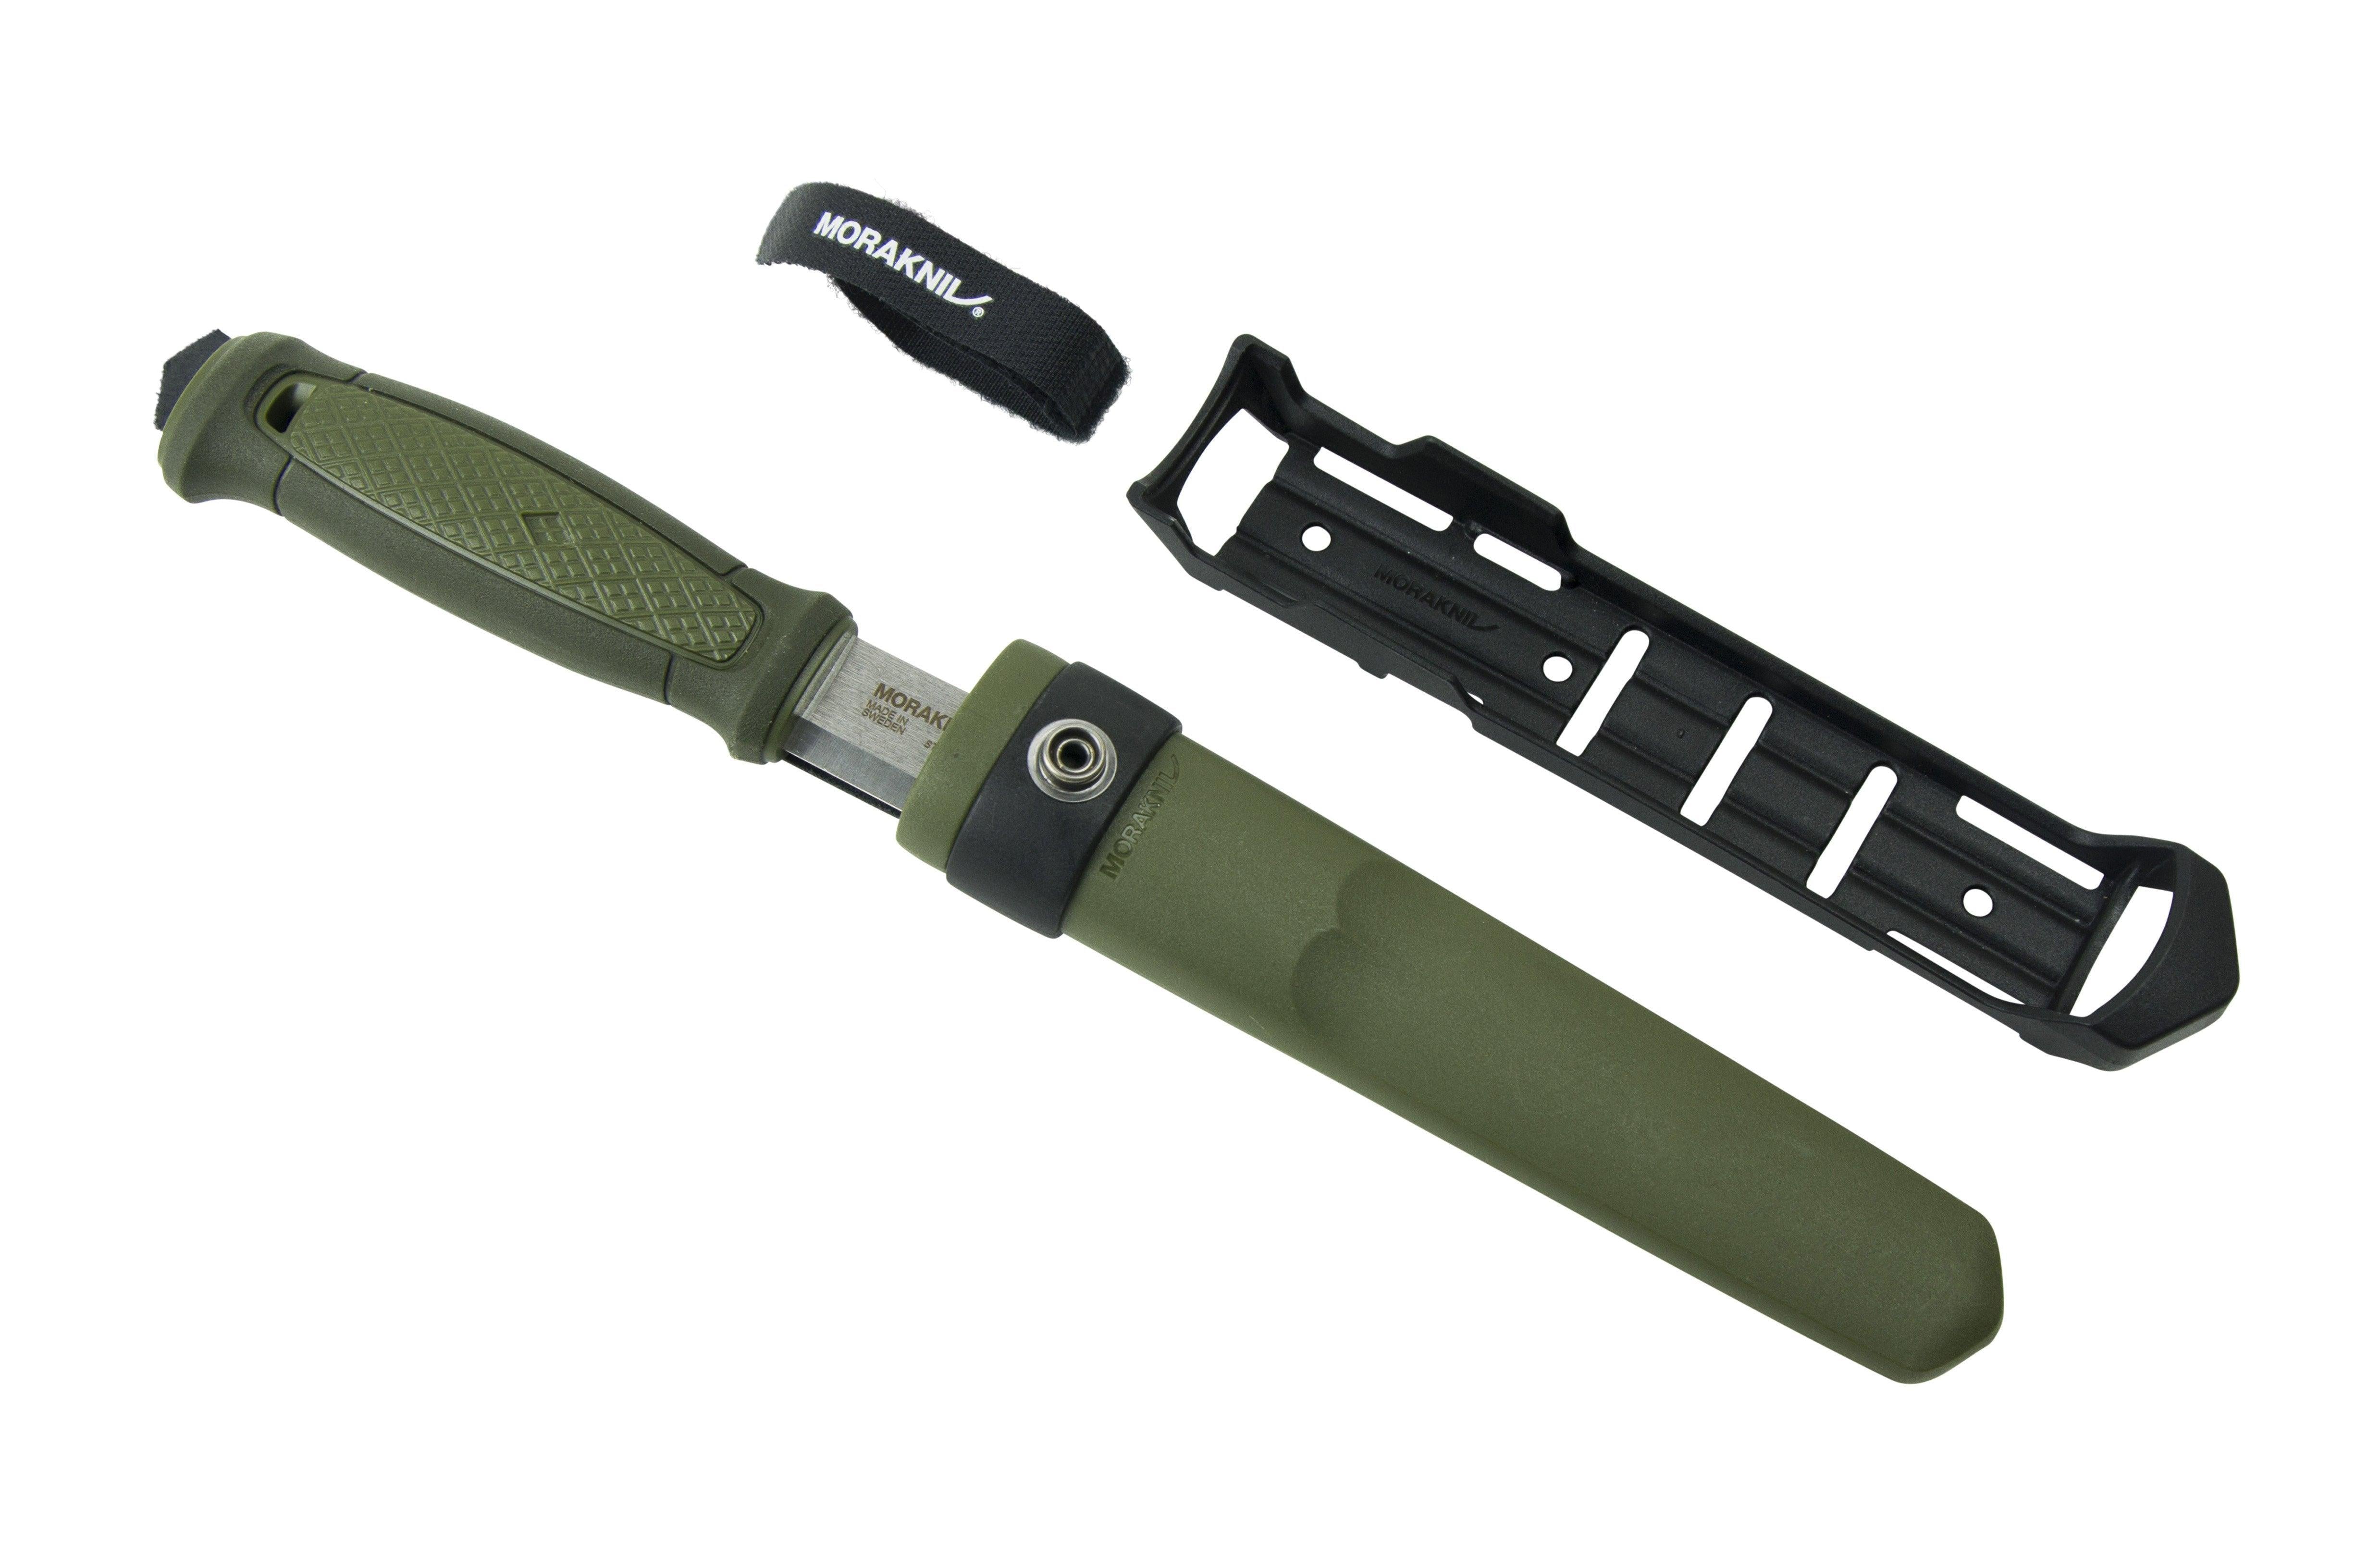 Morakniv Garberg Stainless Knife with Plastic MOLLE Sheath - Trusted Gear Company LLC